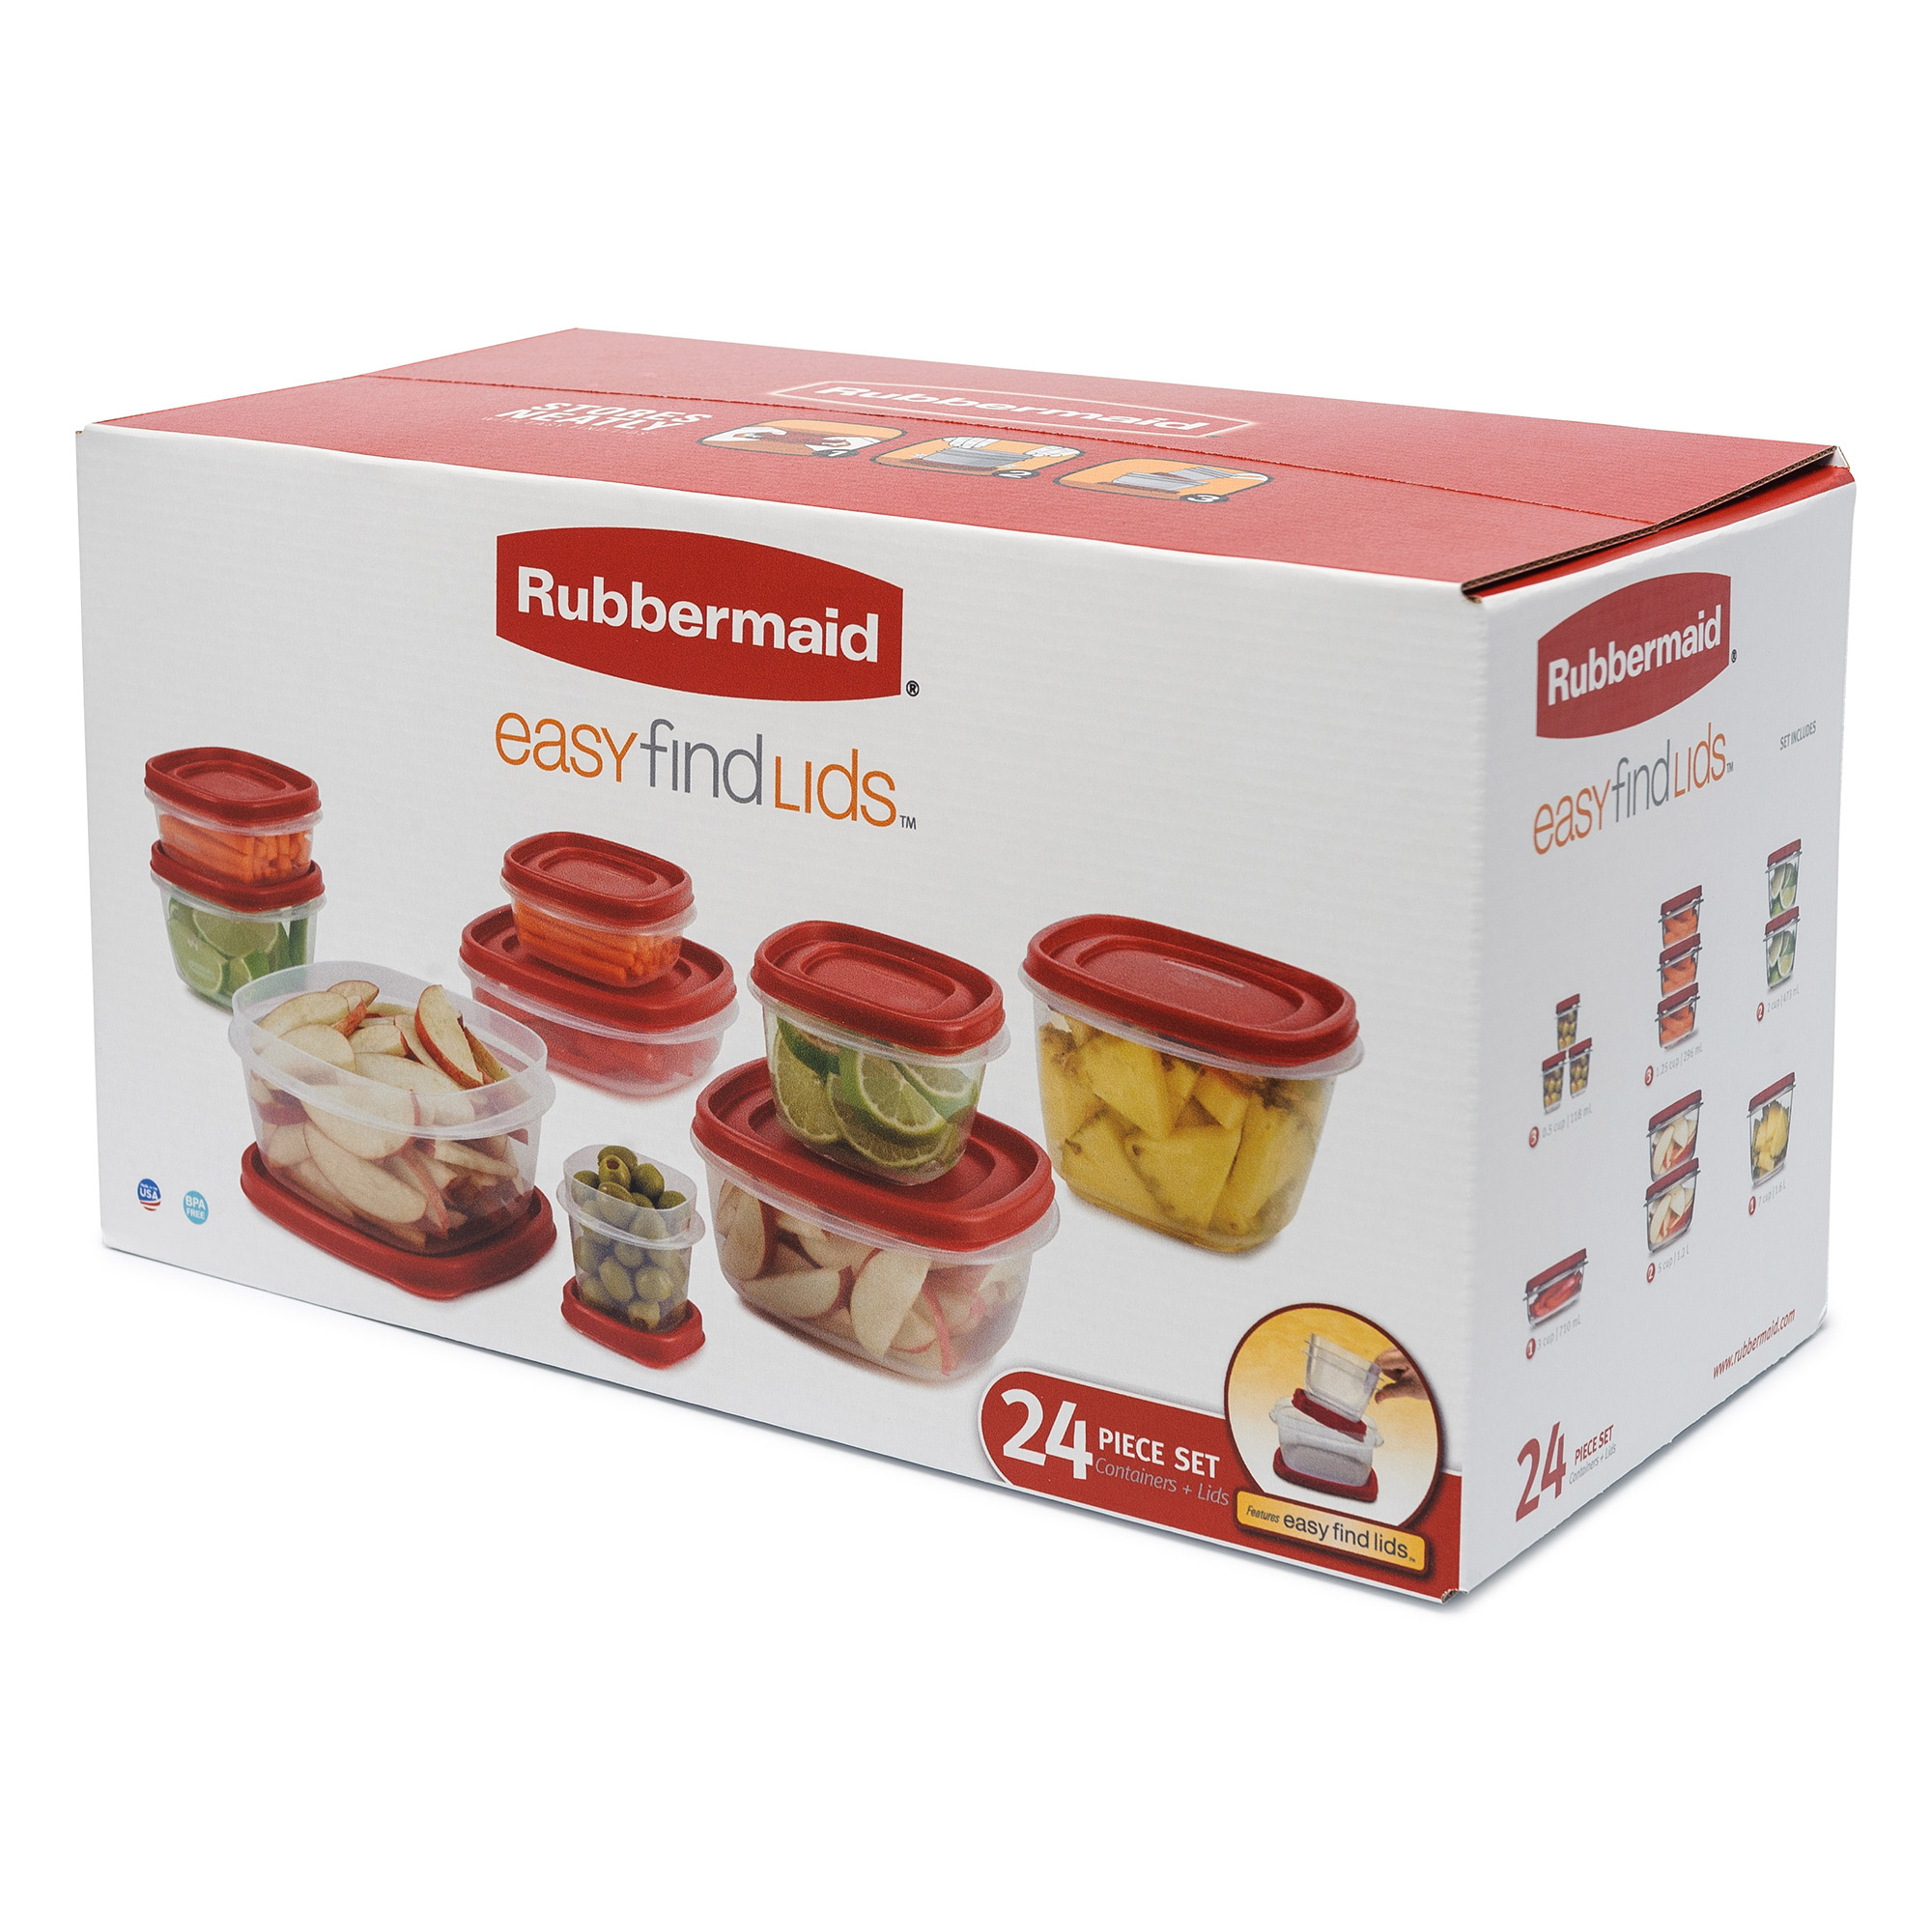 Rubbermaid Food Storage Containers with Easy Find Lids 24-Piece Set - image 1 of 6